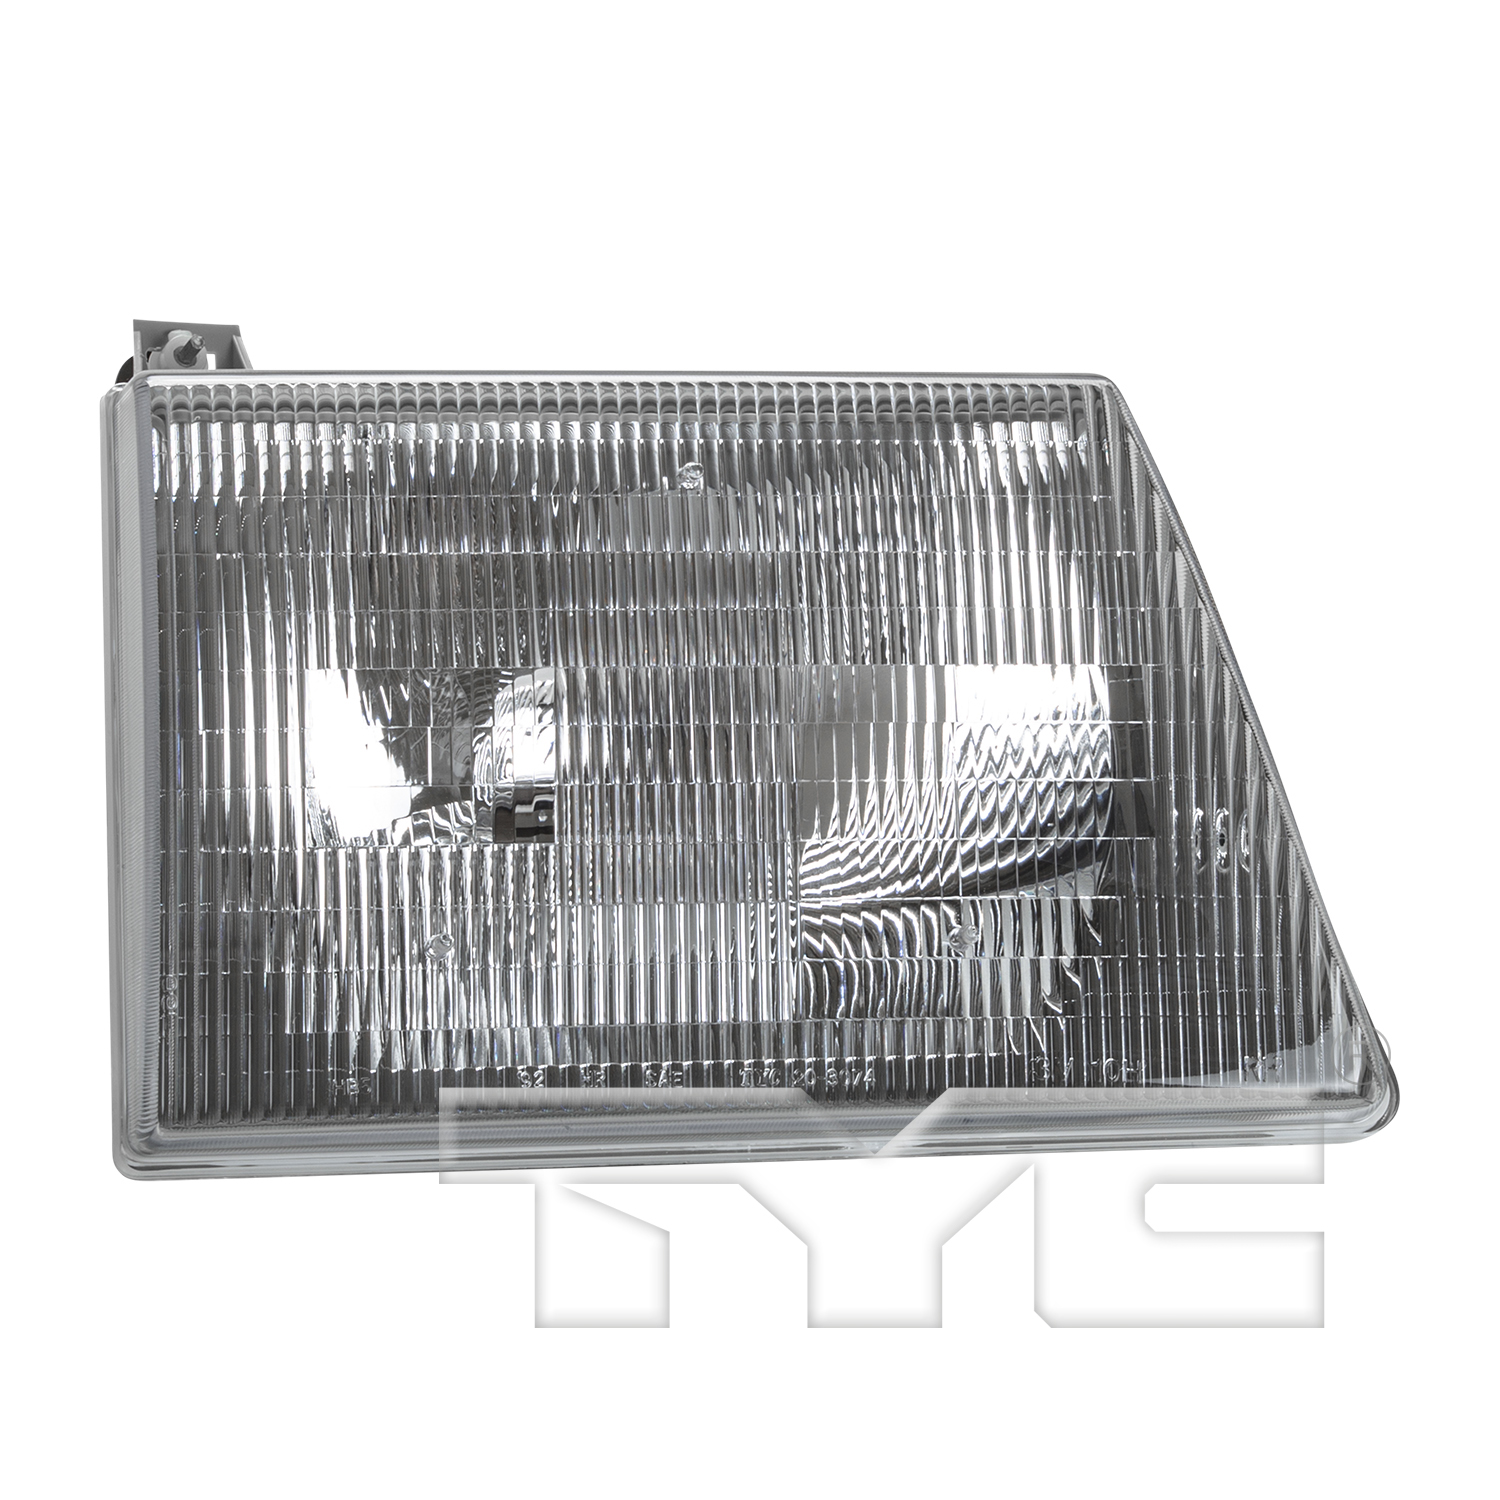 Aftermarket HEADLIGHTS for FORD - E-550 SUPER DUTY, E-550 SUPER DUTY,03-03,RT Headlamp assy composite